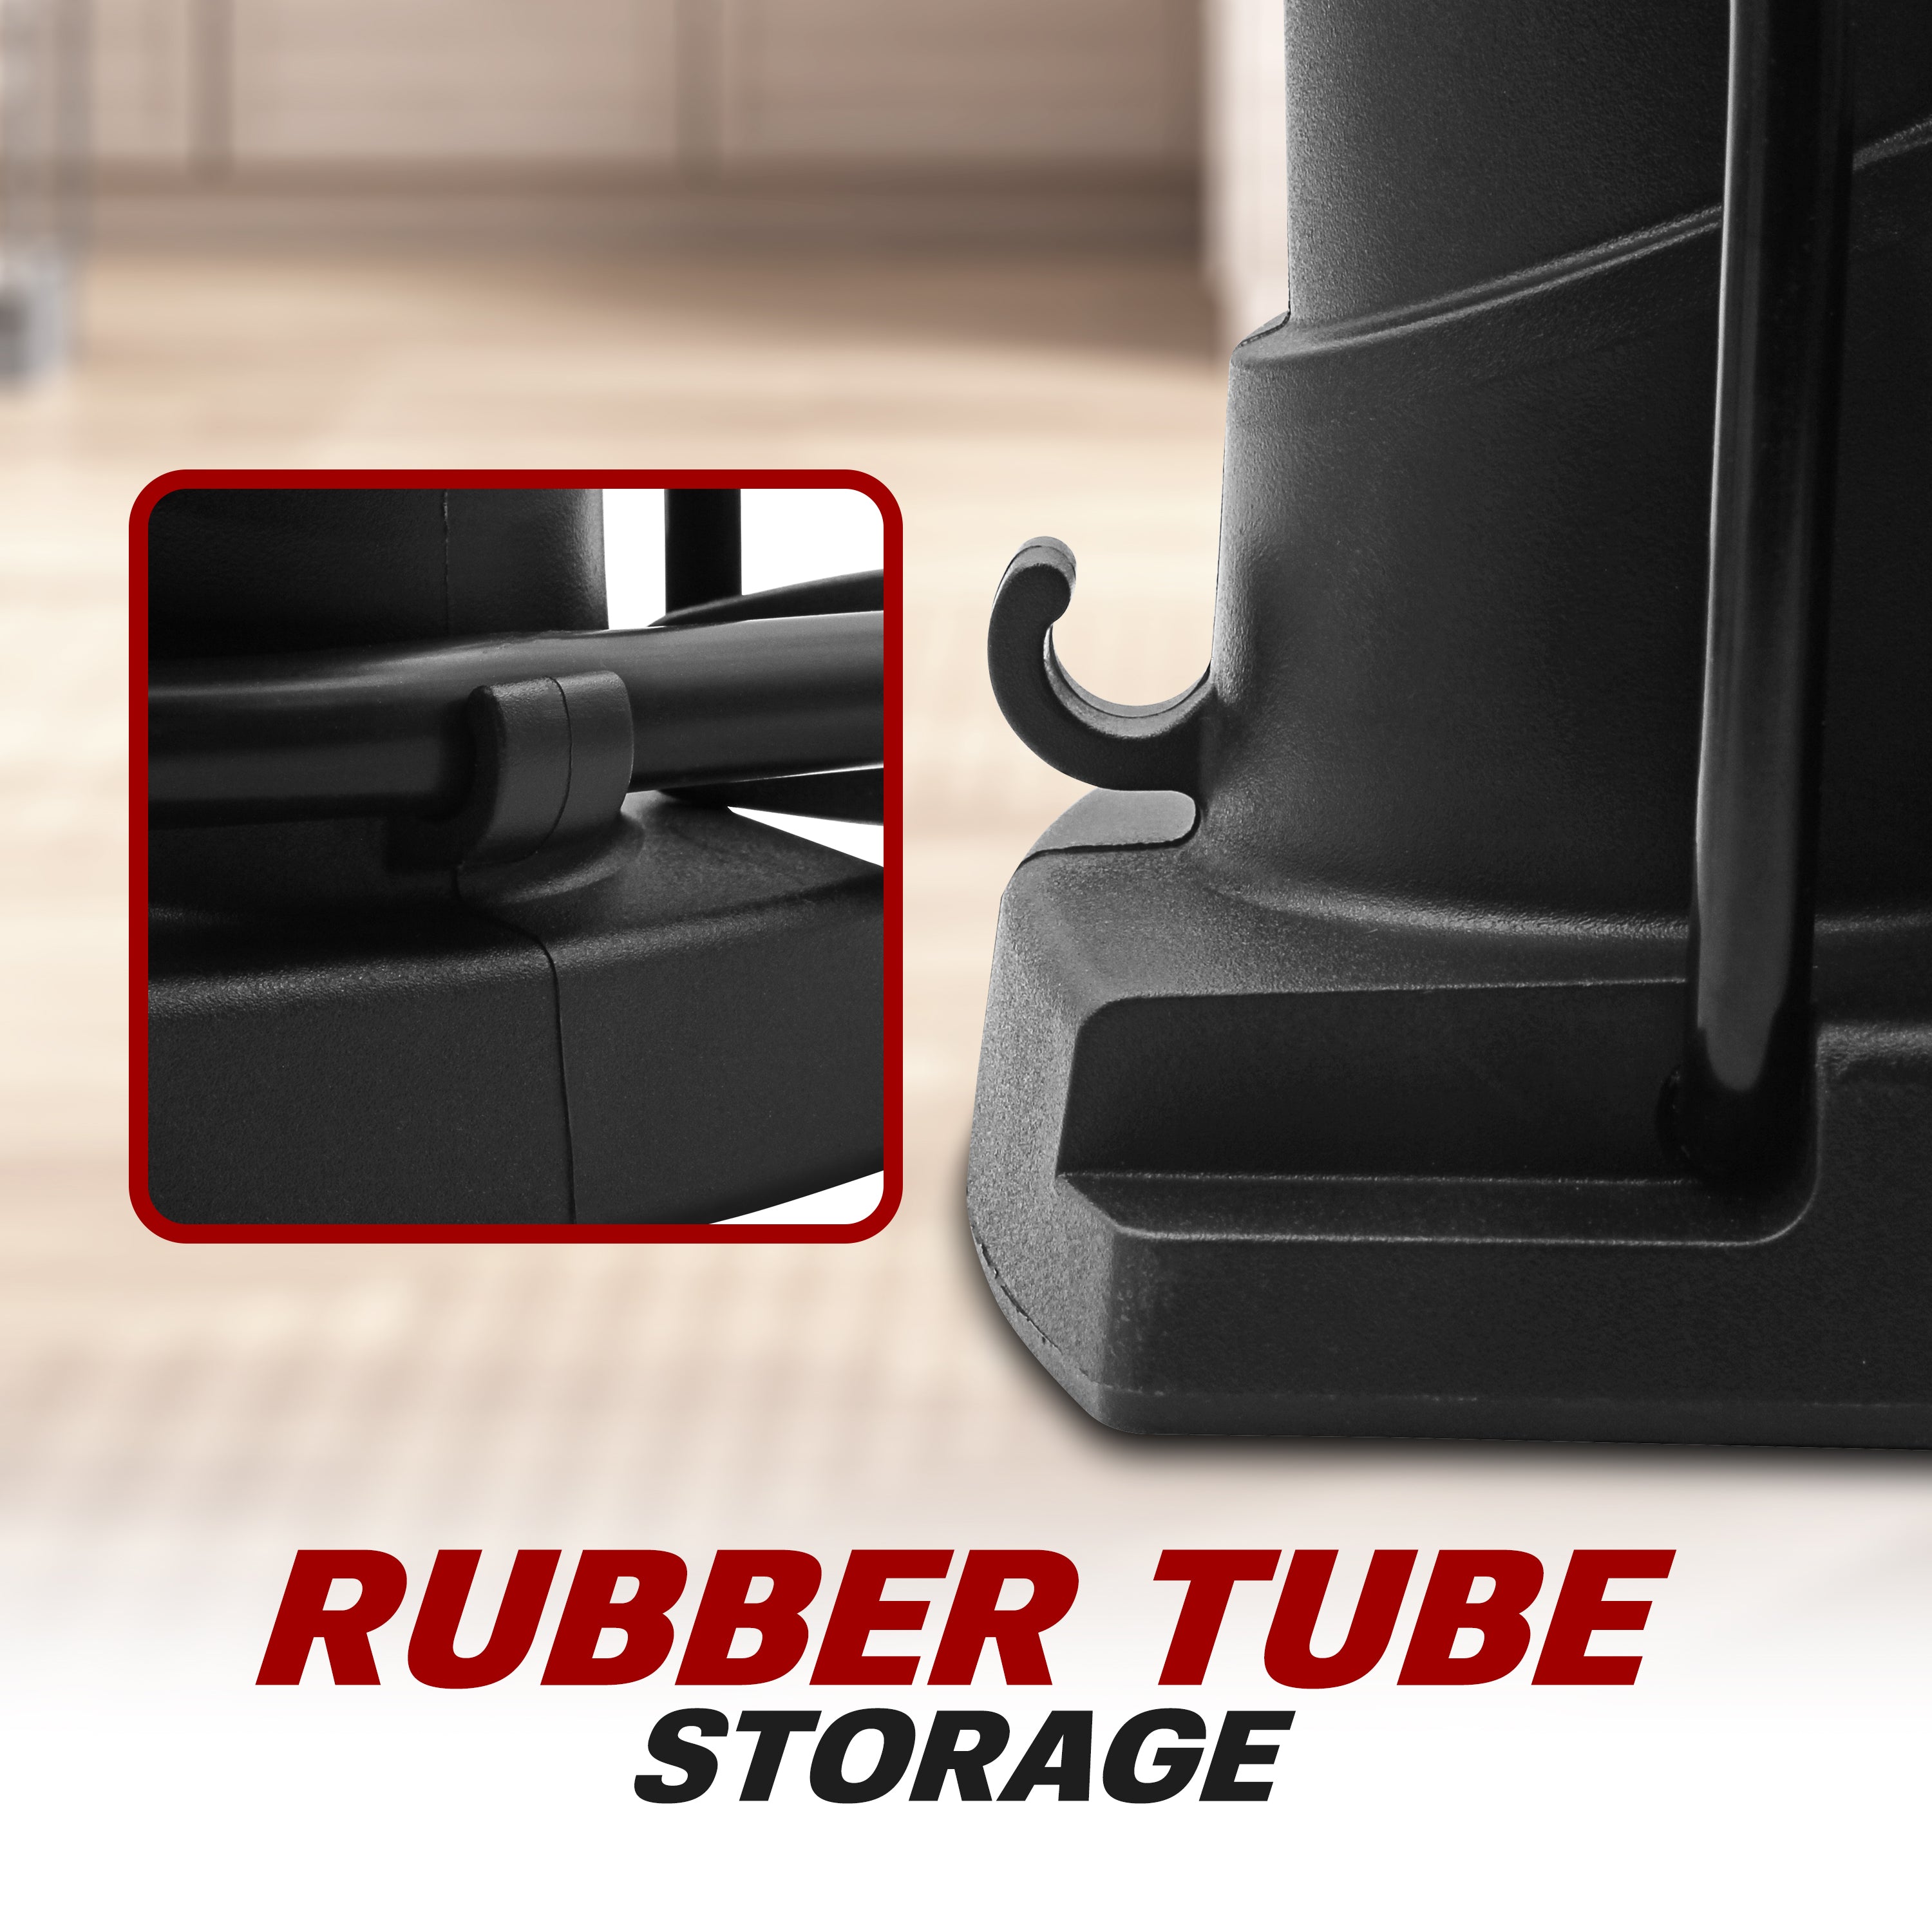 Foot Pump Includes Rubber Tube Storage